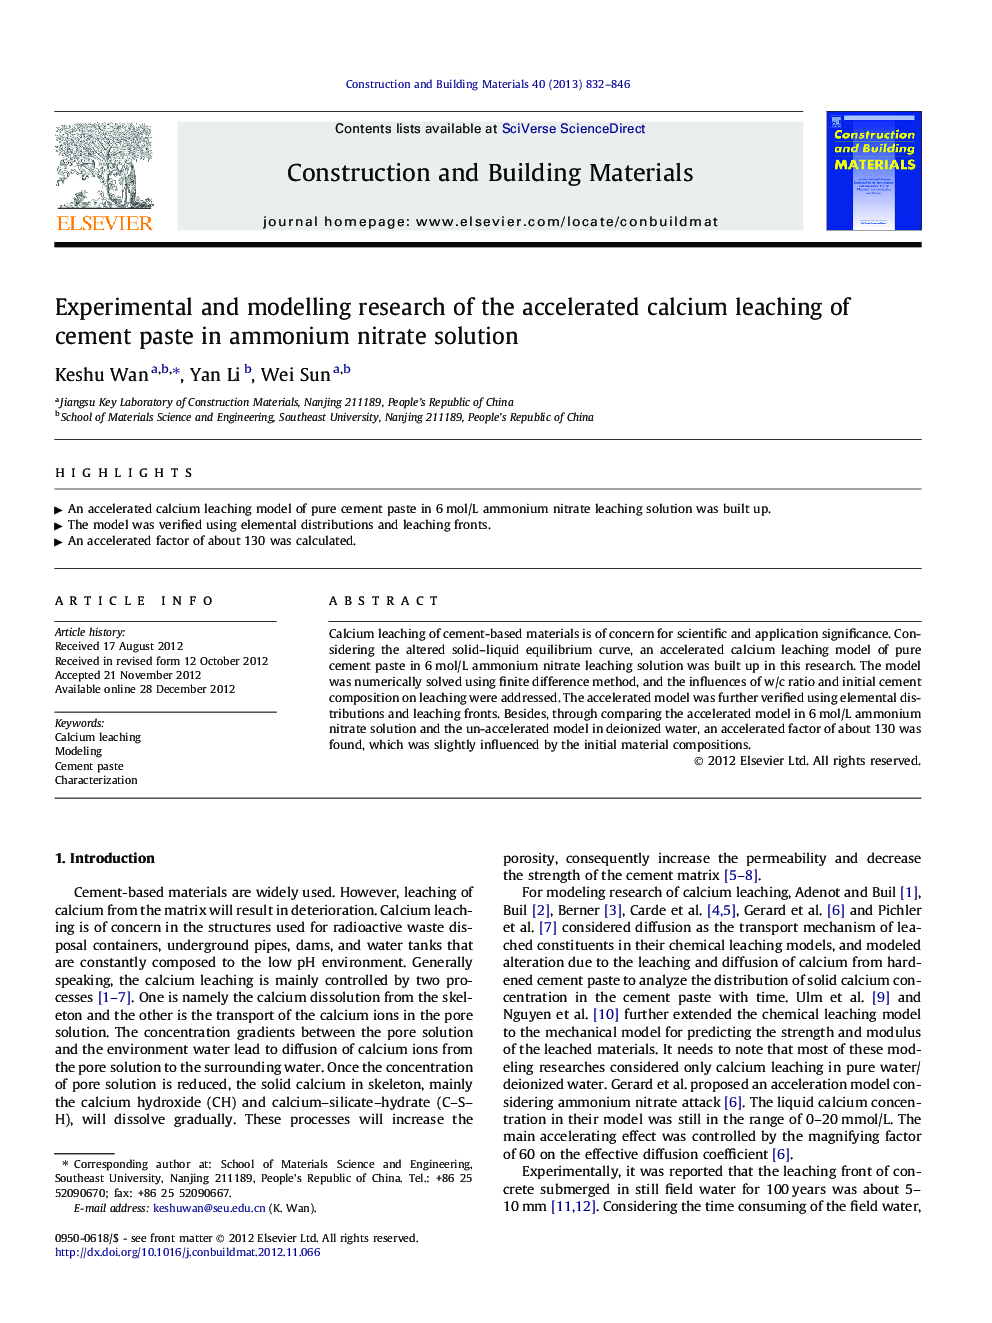 Experimental and modelling research of the accelerated calcium leaching of cement paste in ammonium nitrate solution